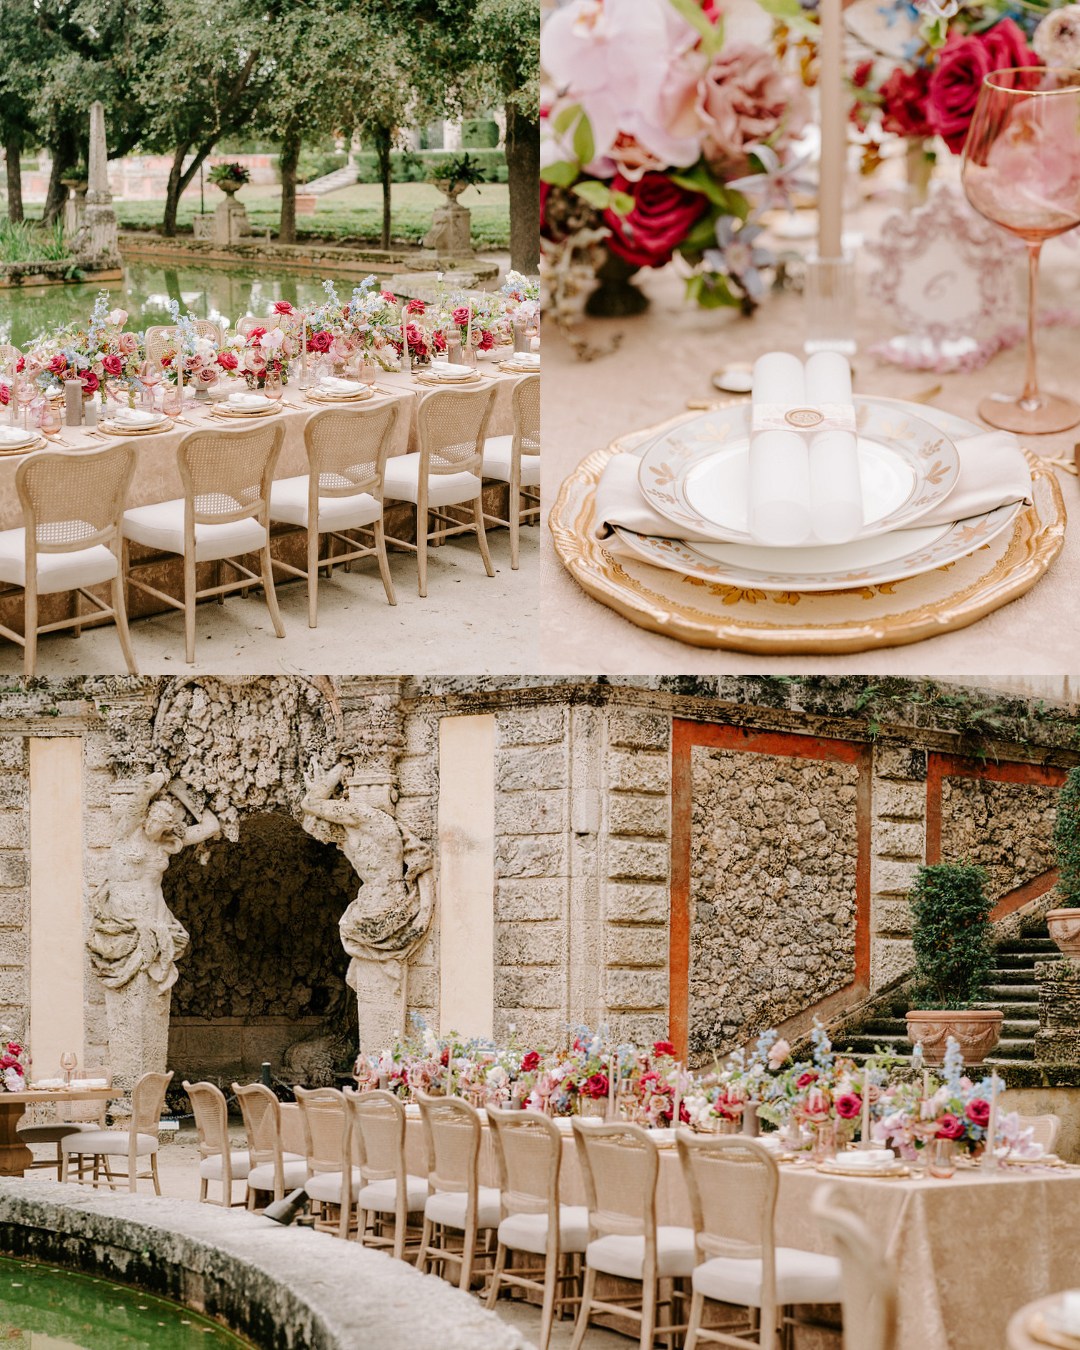 collage of wedding reception table with blush linens and pink, red and blue florals set amongst an ornate garden center with a European flare